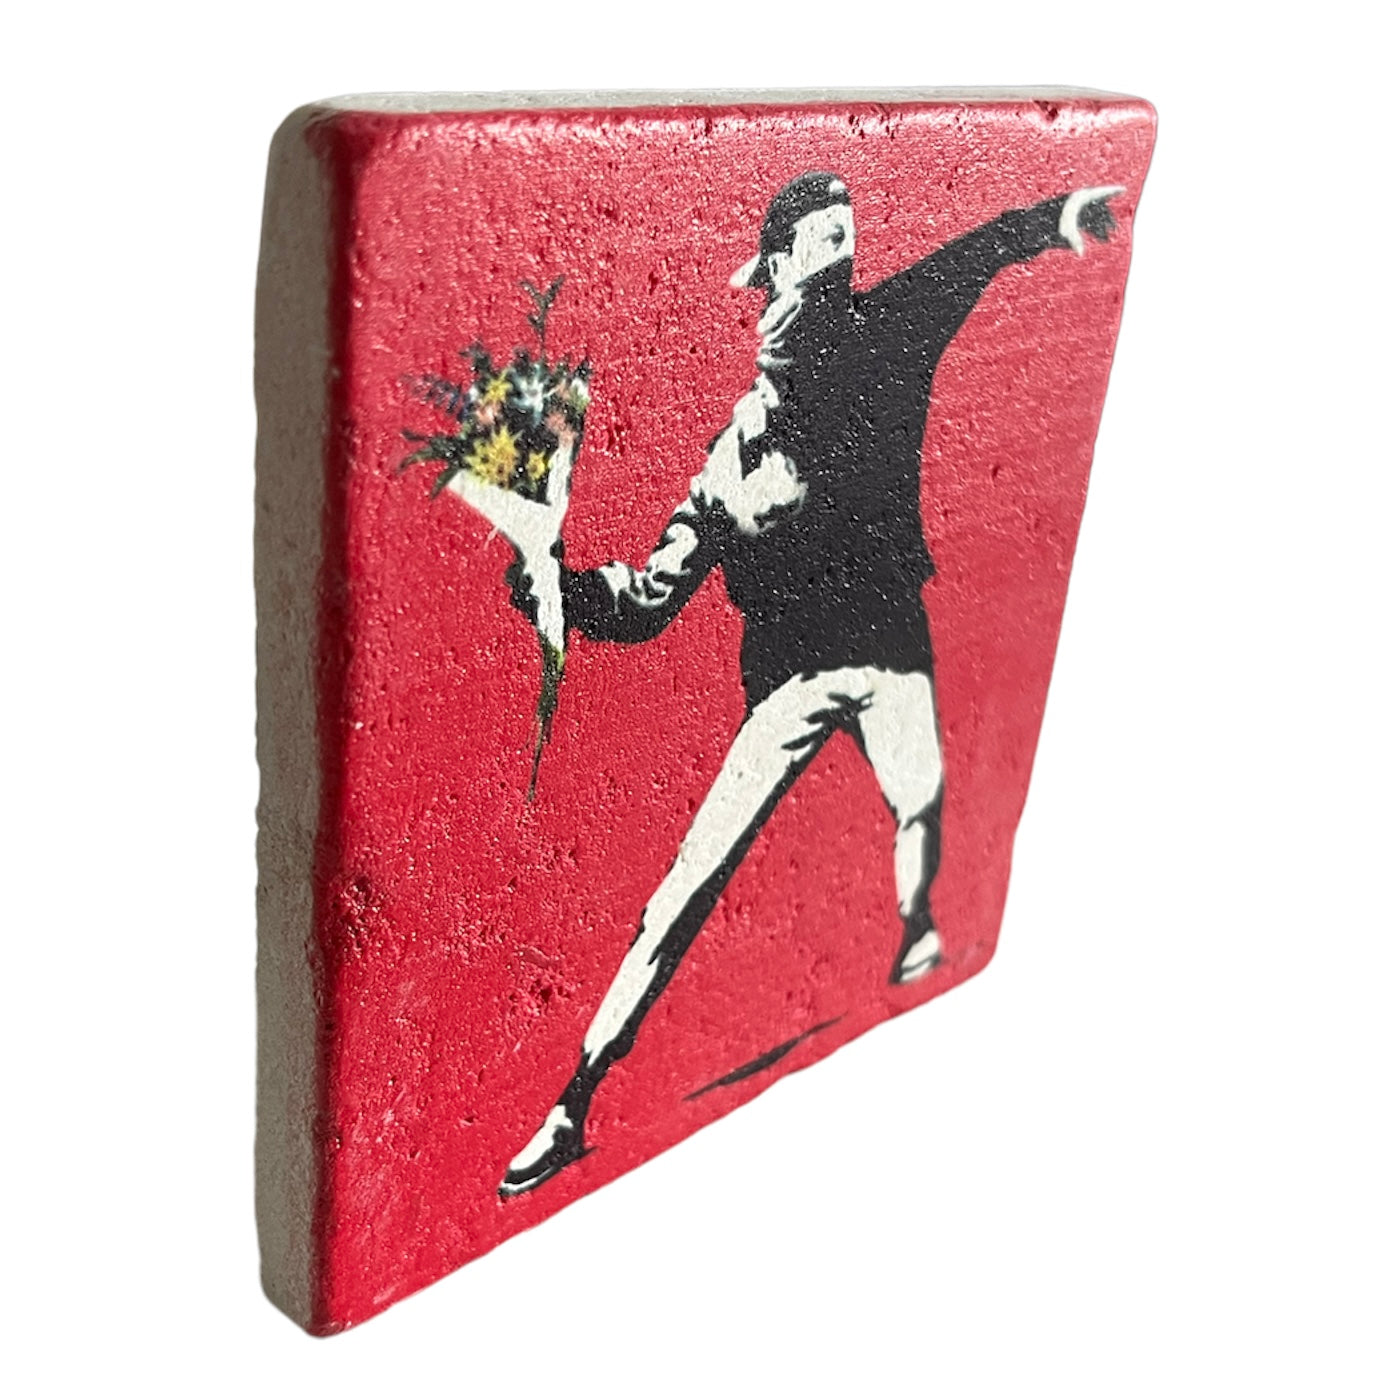 BANKSY *Flower Thrower (Red Edition)* Screenprint on stone Limited Edition